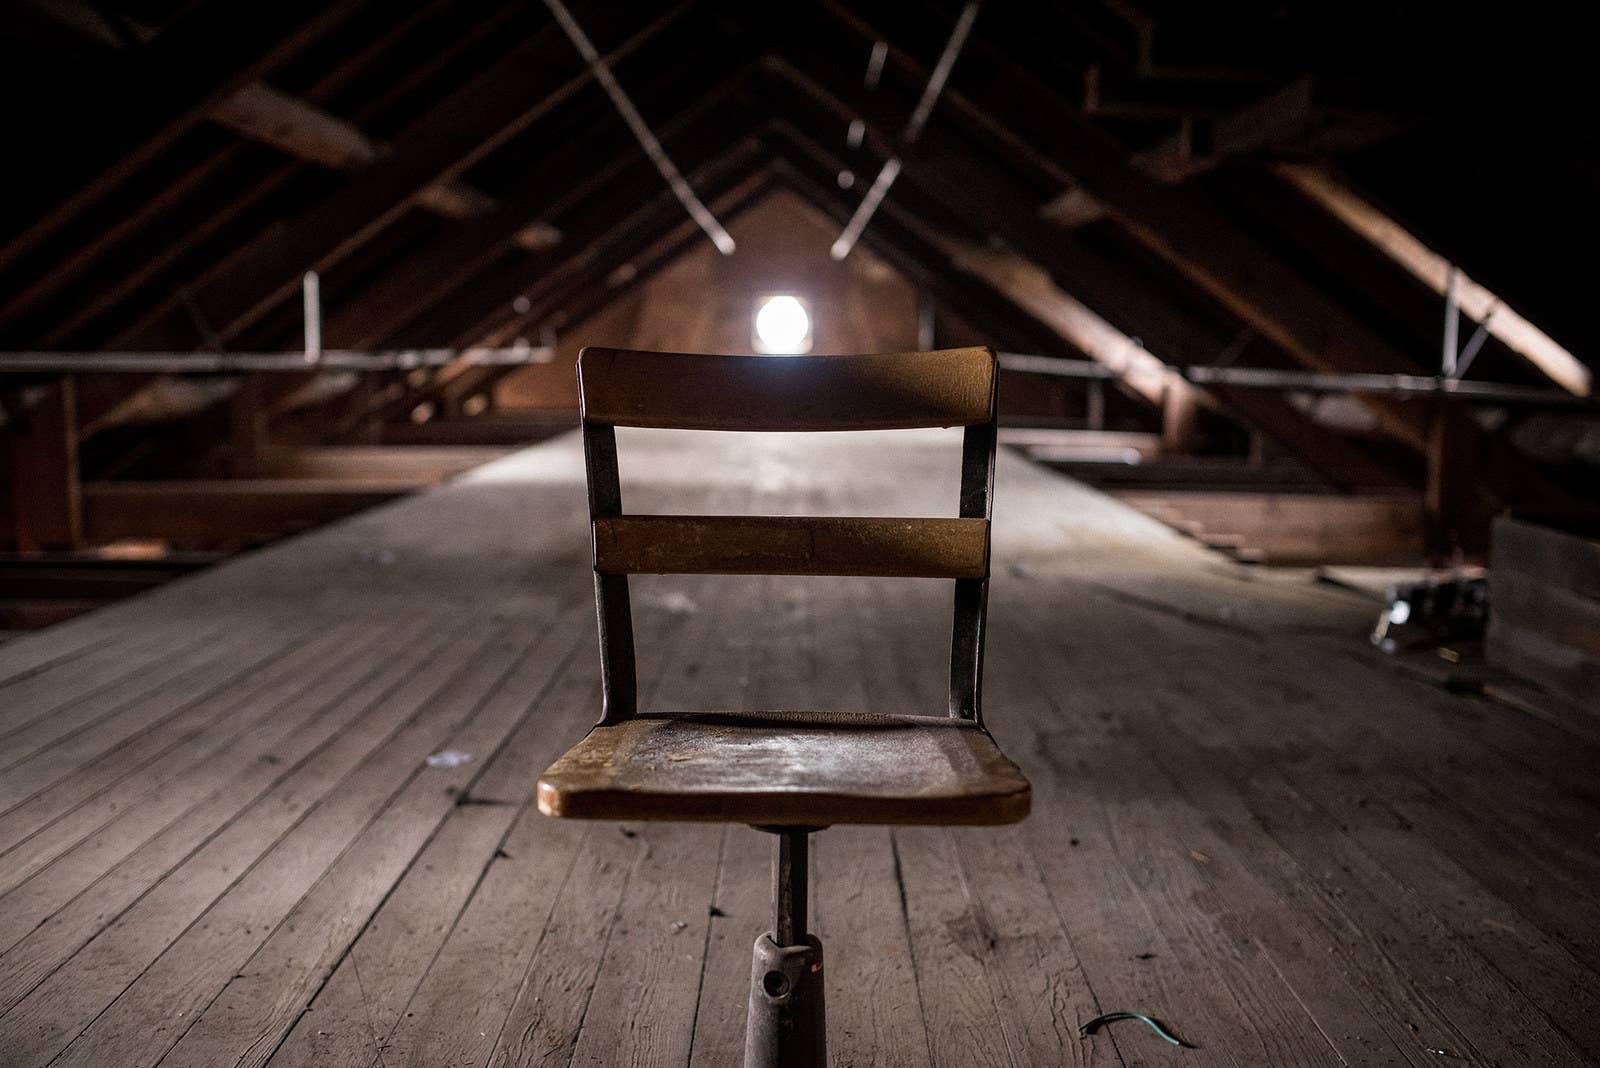 The loft above the attic of the now-closed St. Joseph’s Orphanage.